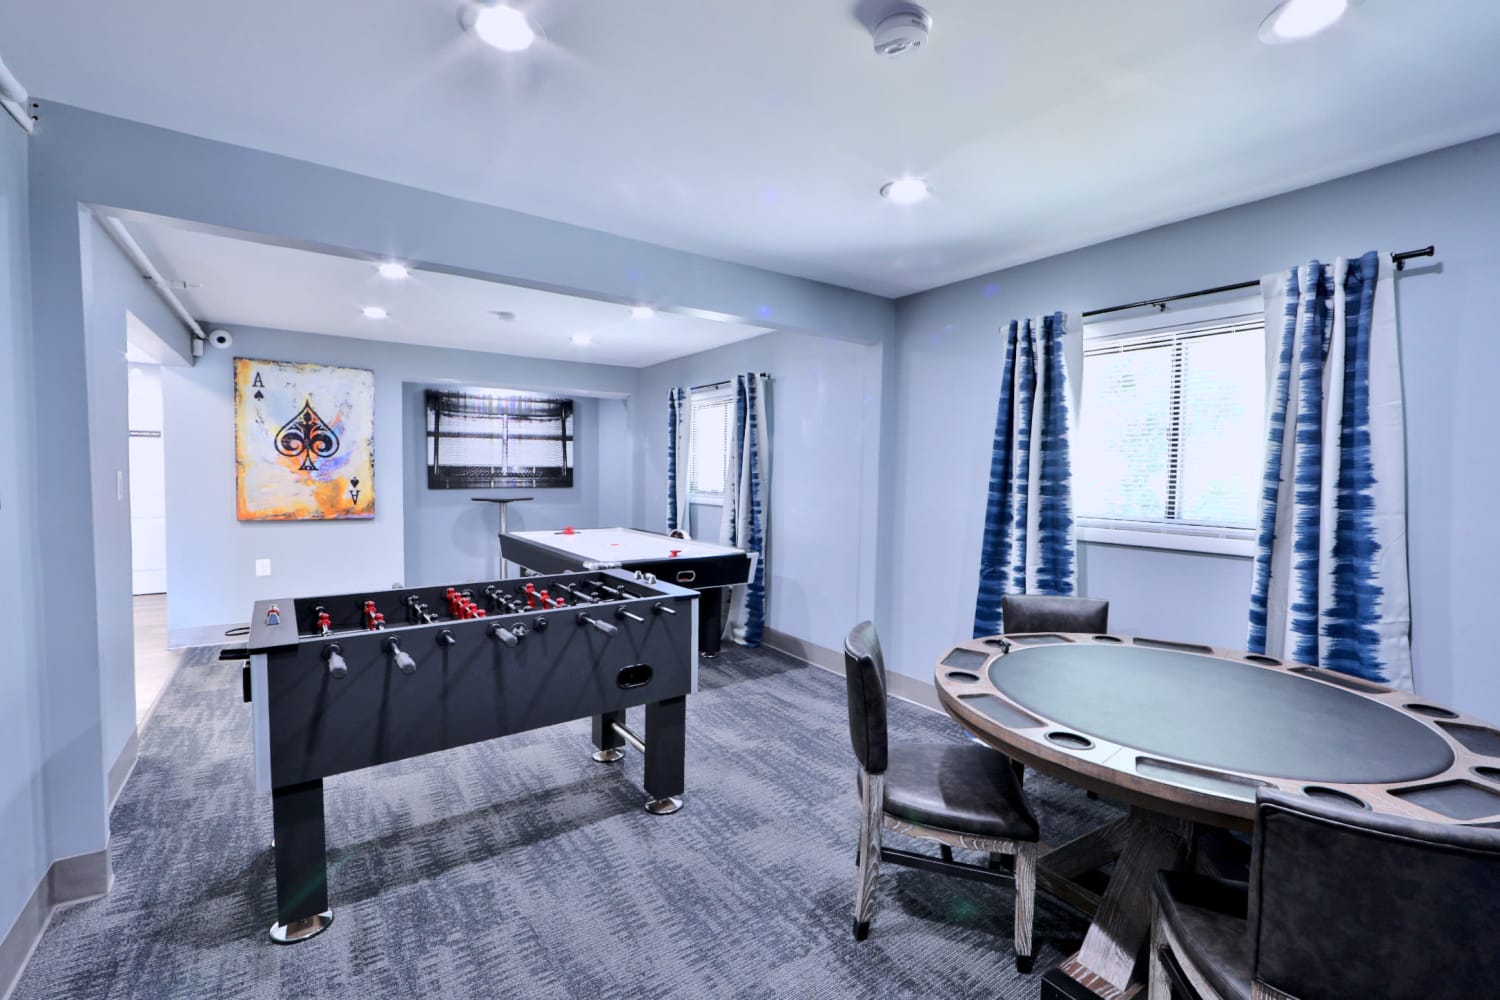 Game room at Gwynn Oaks Landing Apartments & Townhomes in Baltimore, Maryland